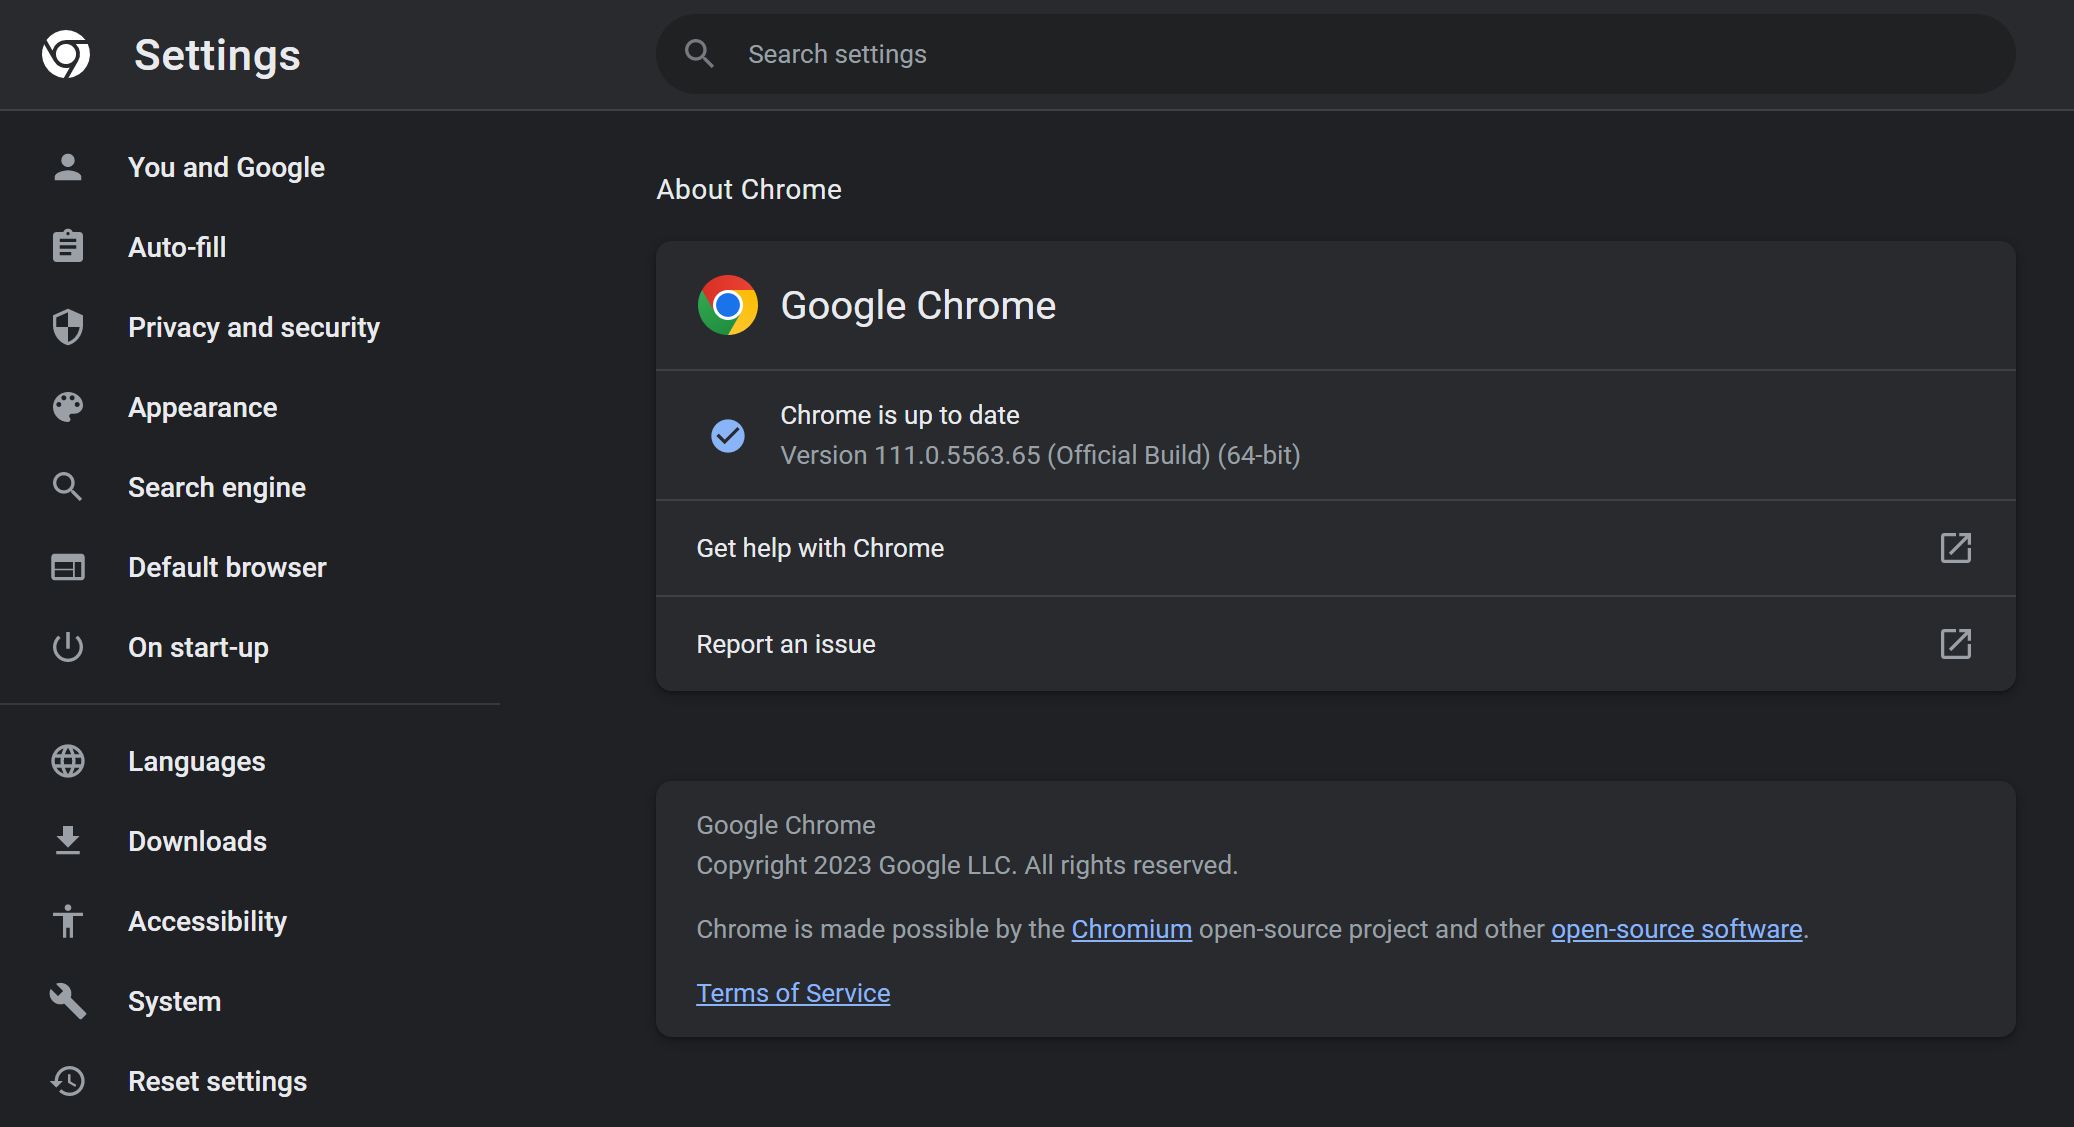 about chrome settings page